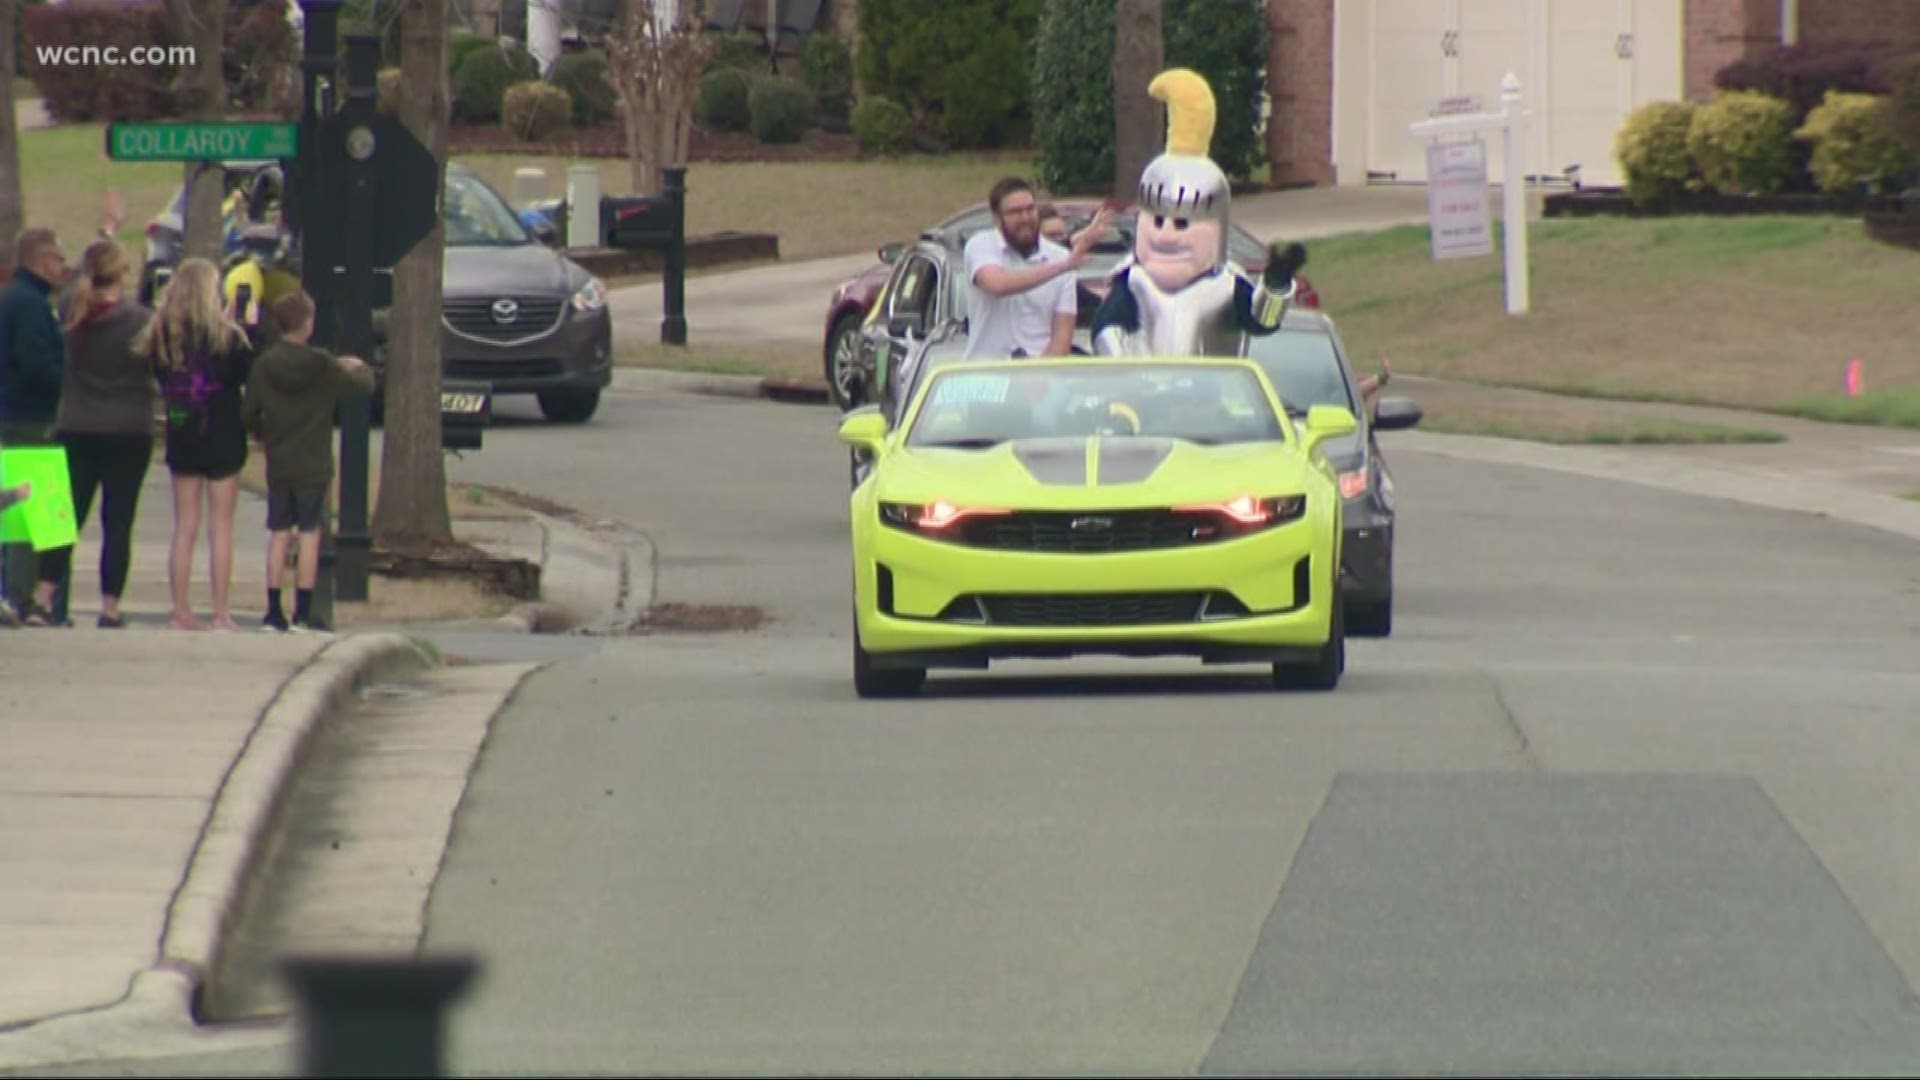 Teachers and principals of several Union County elementary schools got behind the wheel and paraded through their students' neighborhoods.